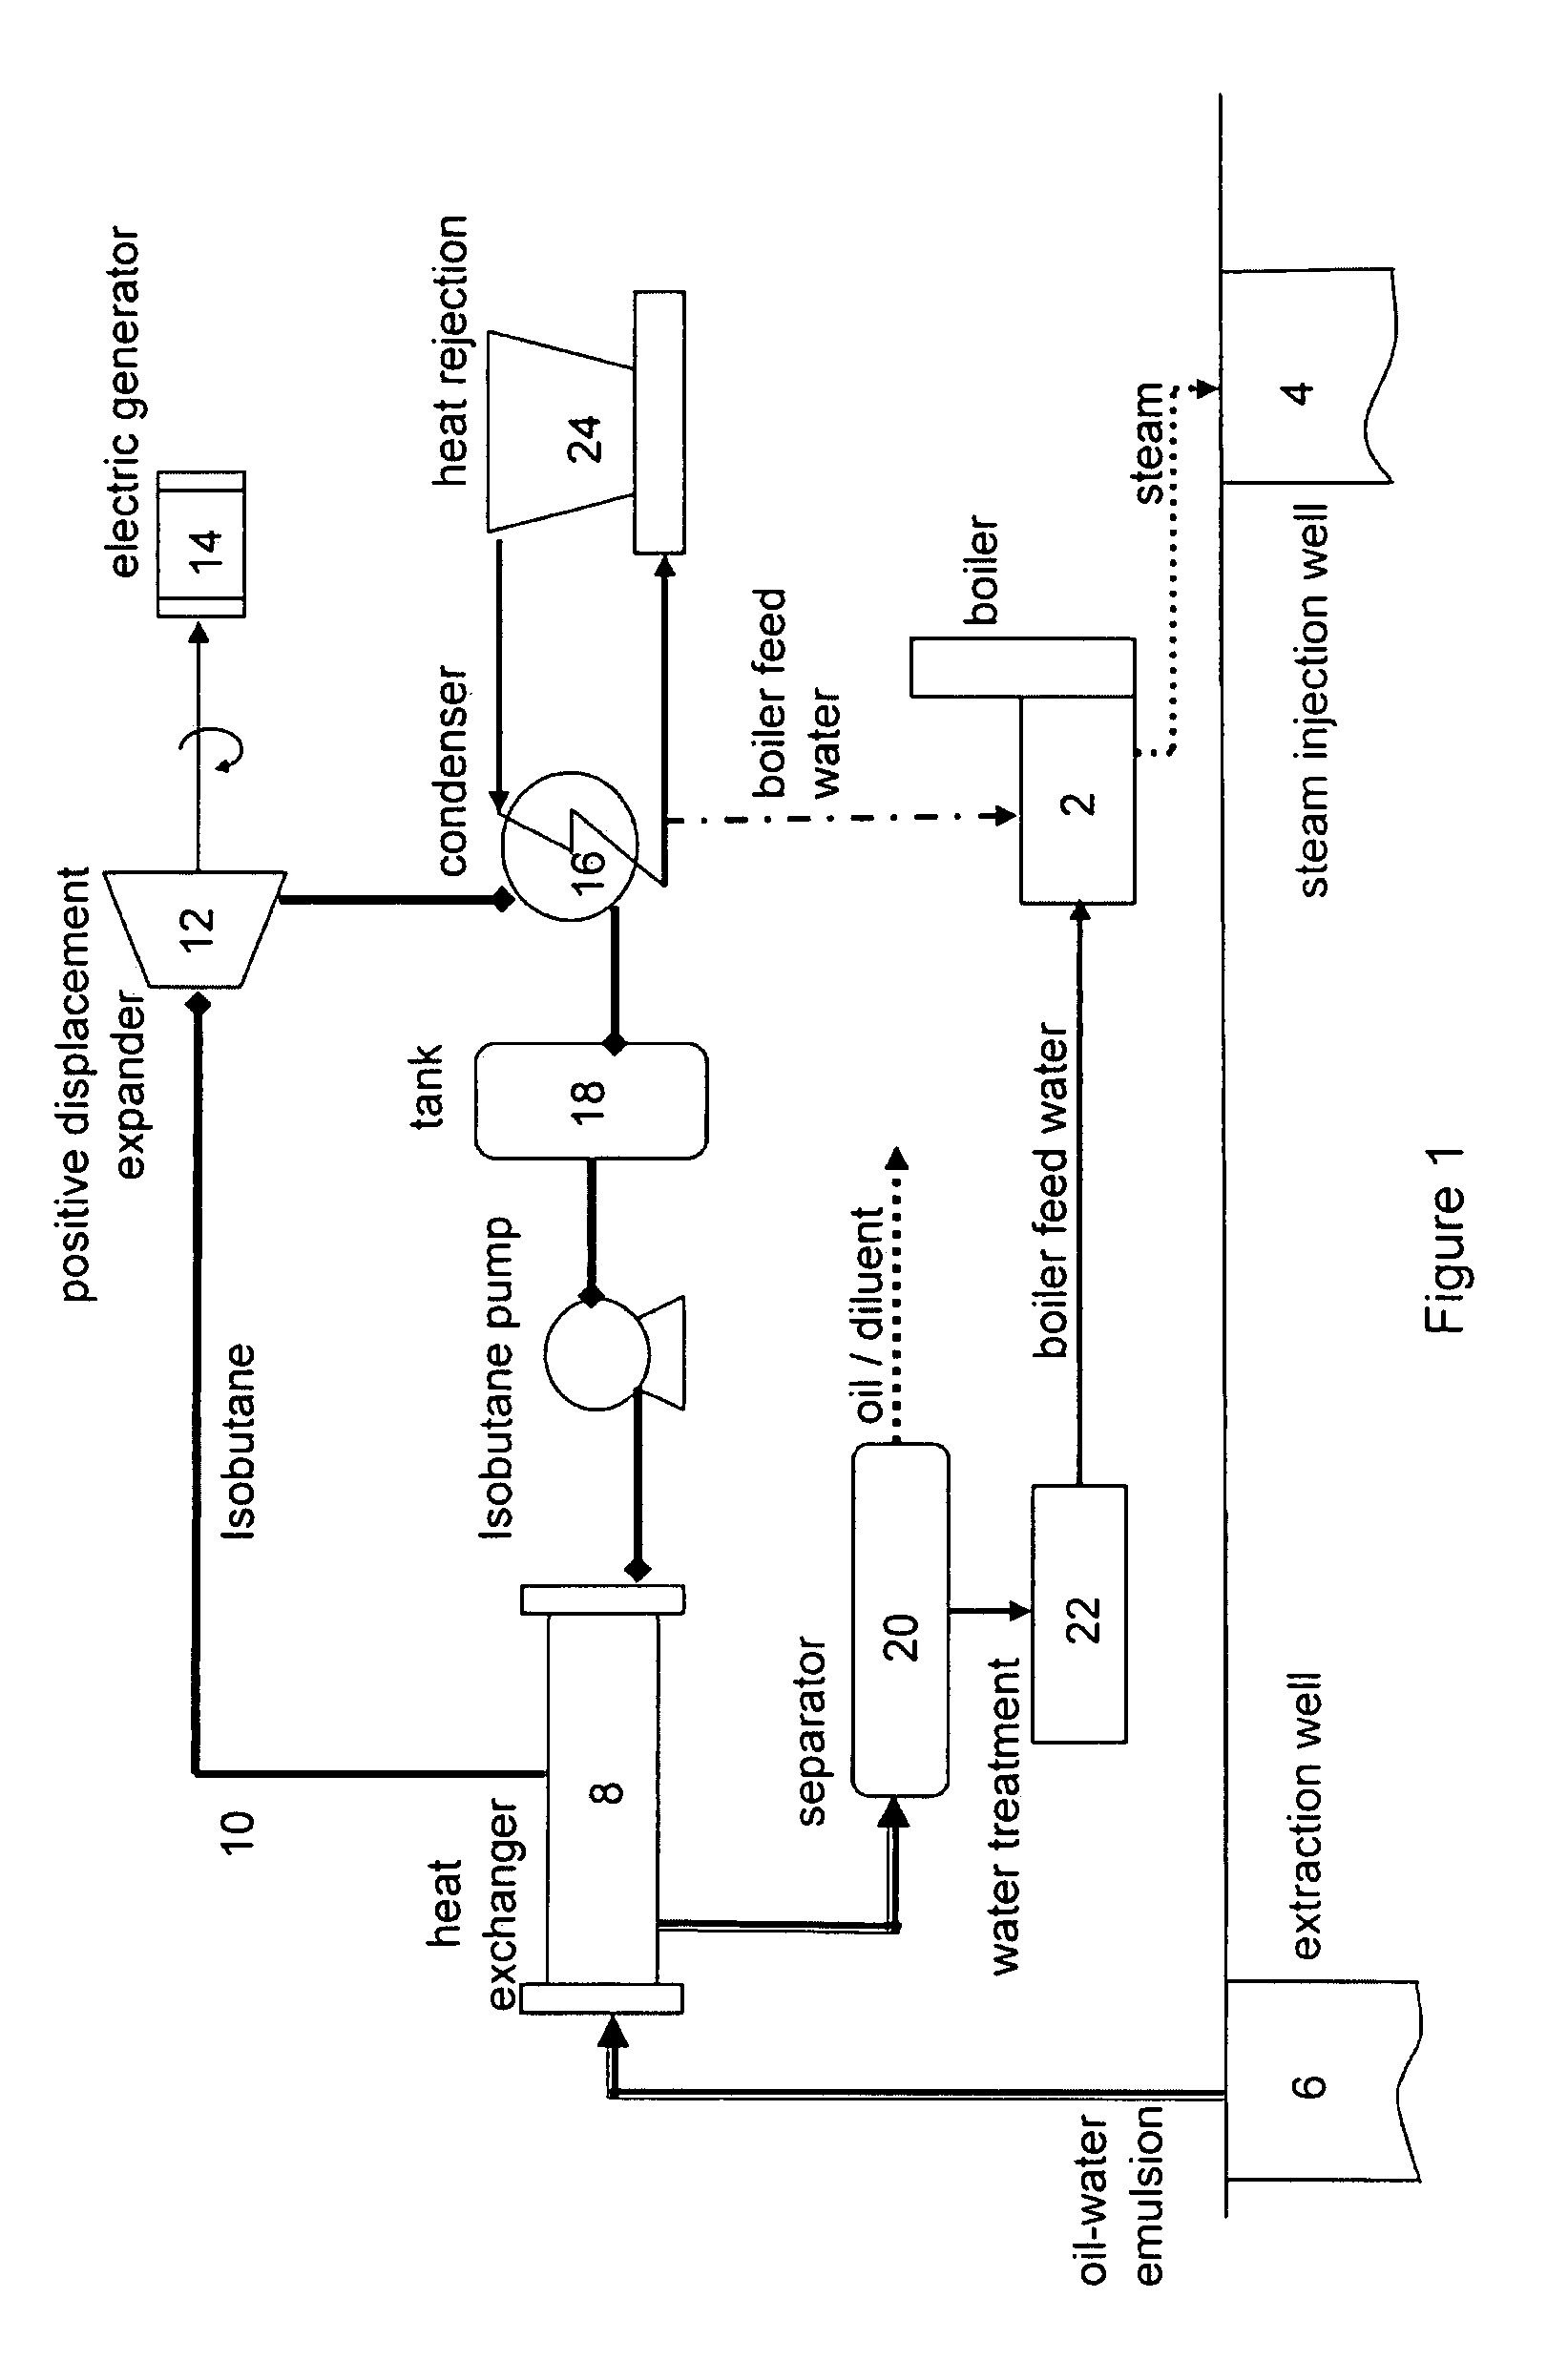 System and method for producing power from thermal energy stored in a fluid produced during heavy oil extraction